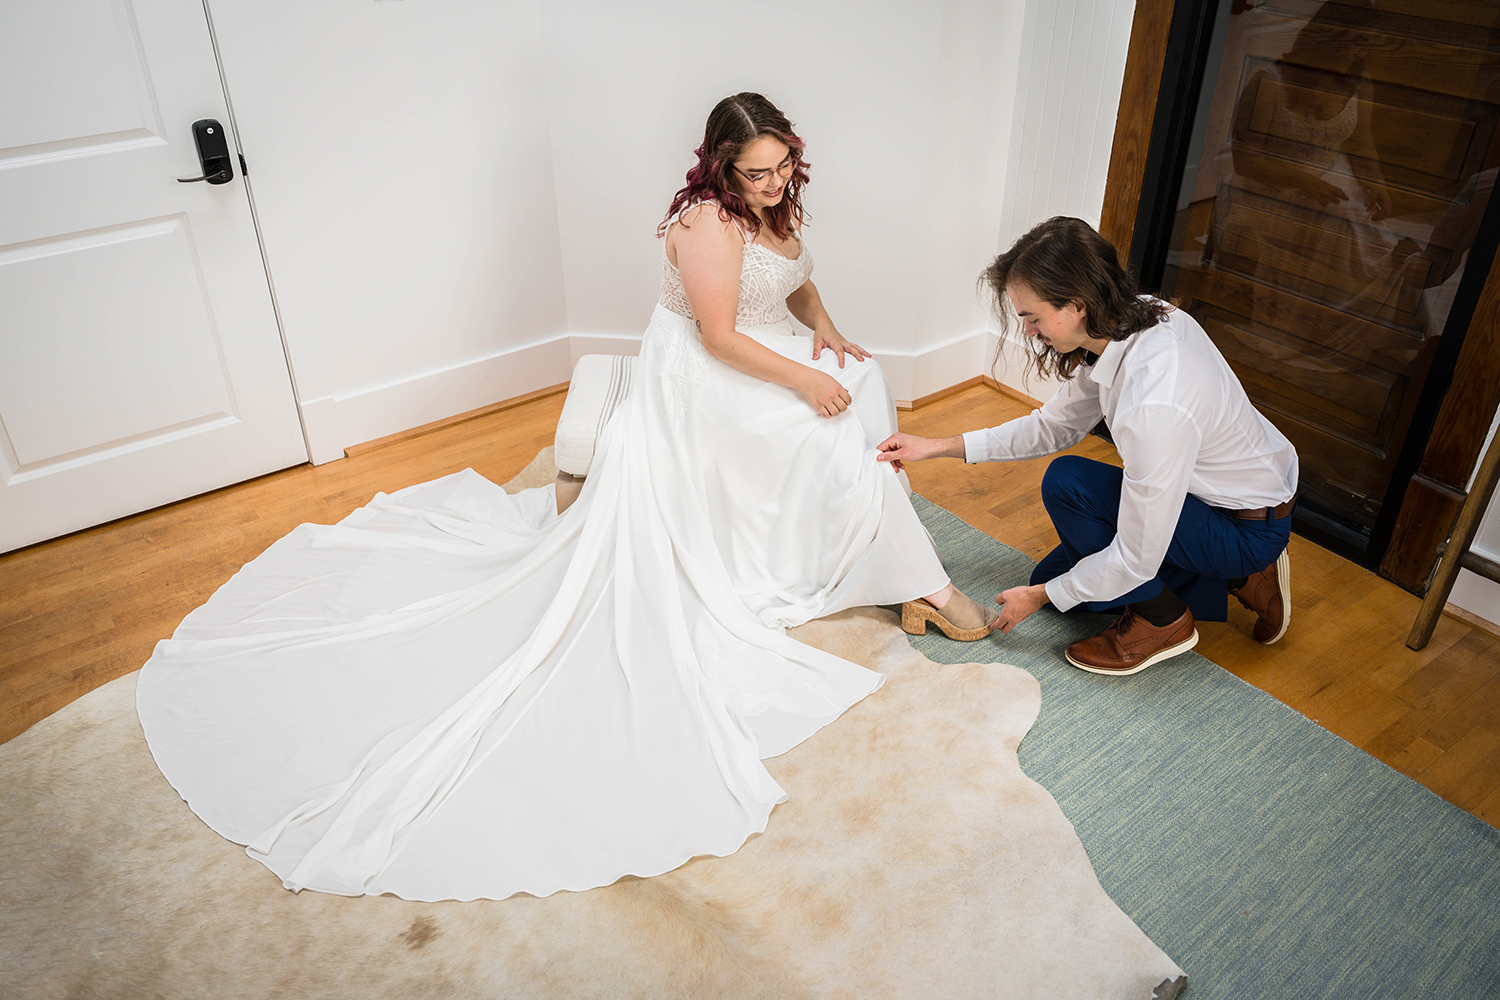 A couple on their elopement day help each other get ready for their wedding day in their hotel room at Fire Station One in Roanoke, Virginia.